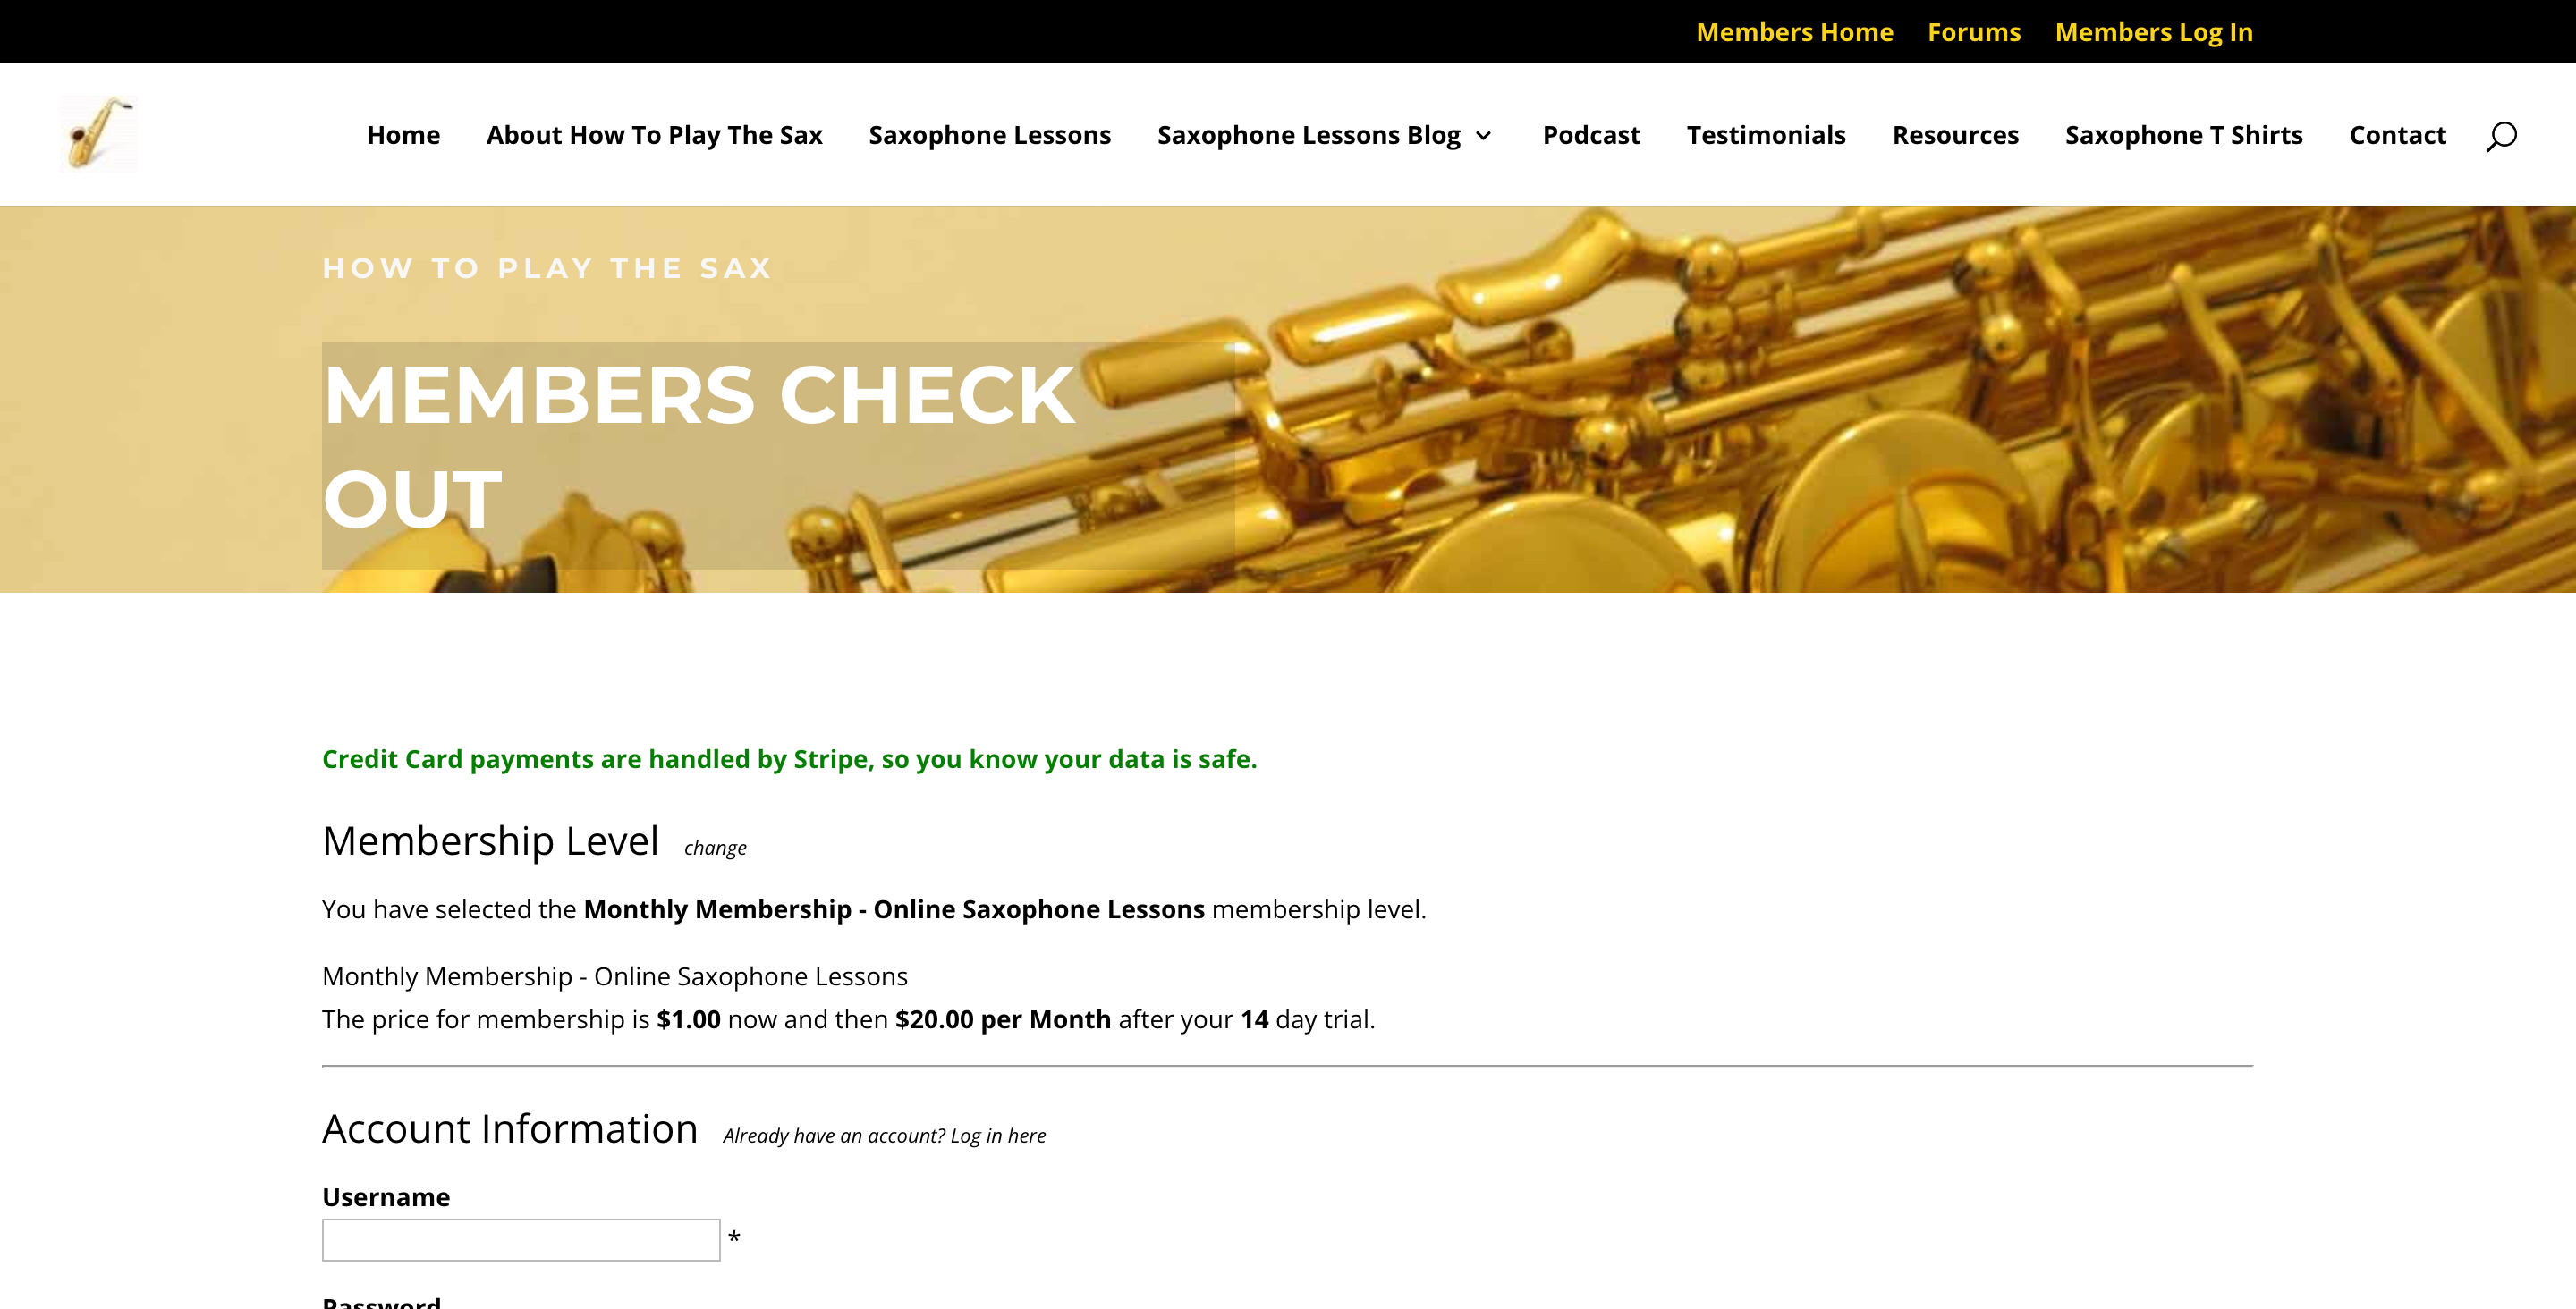 How to Play the Sax Membership Checkout